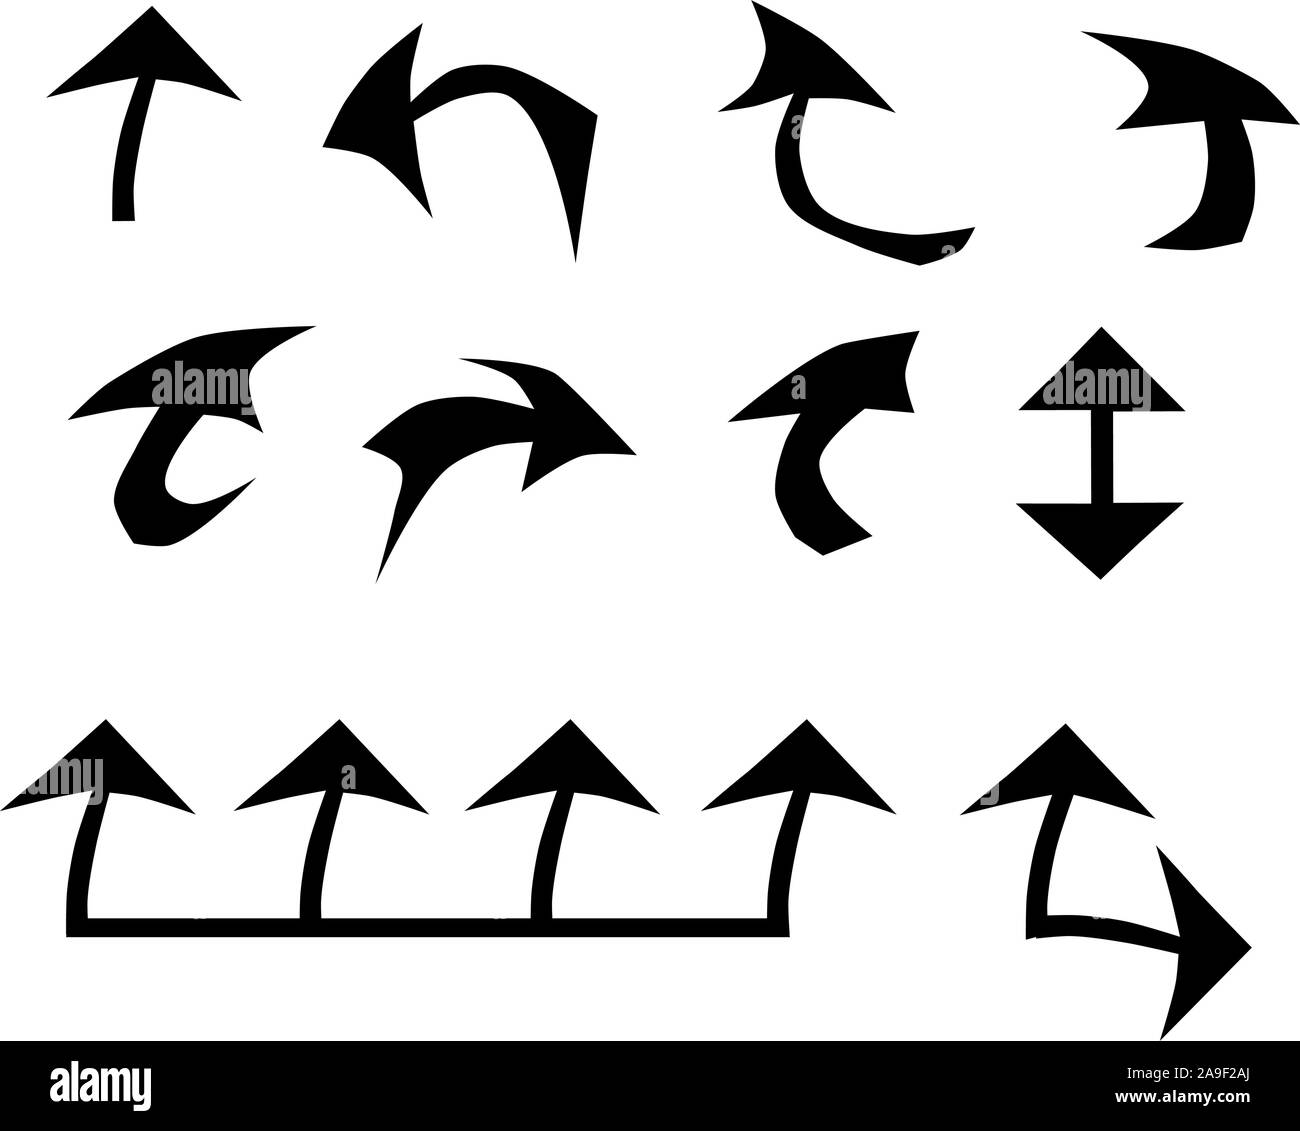 One and several arrows in set. Modern illustration with black arrows. Stock Vector